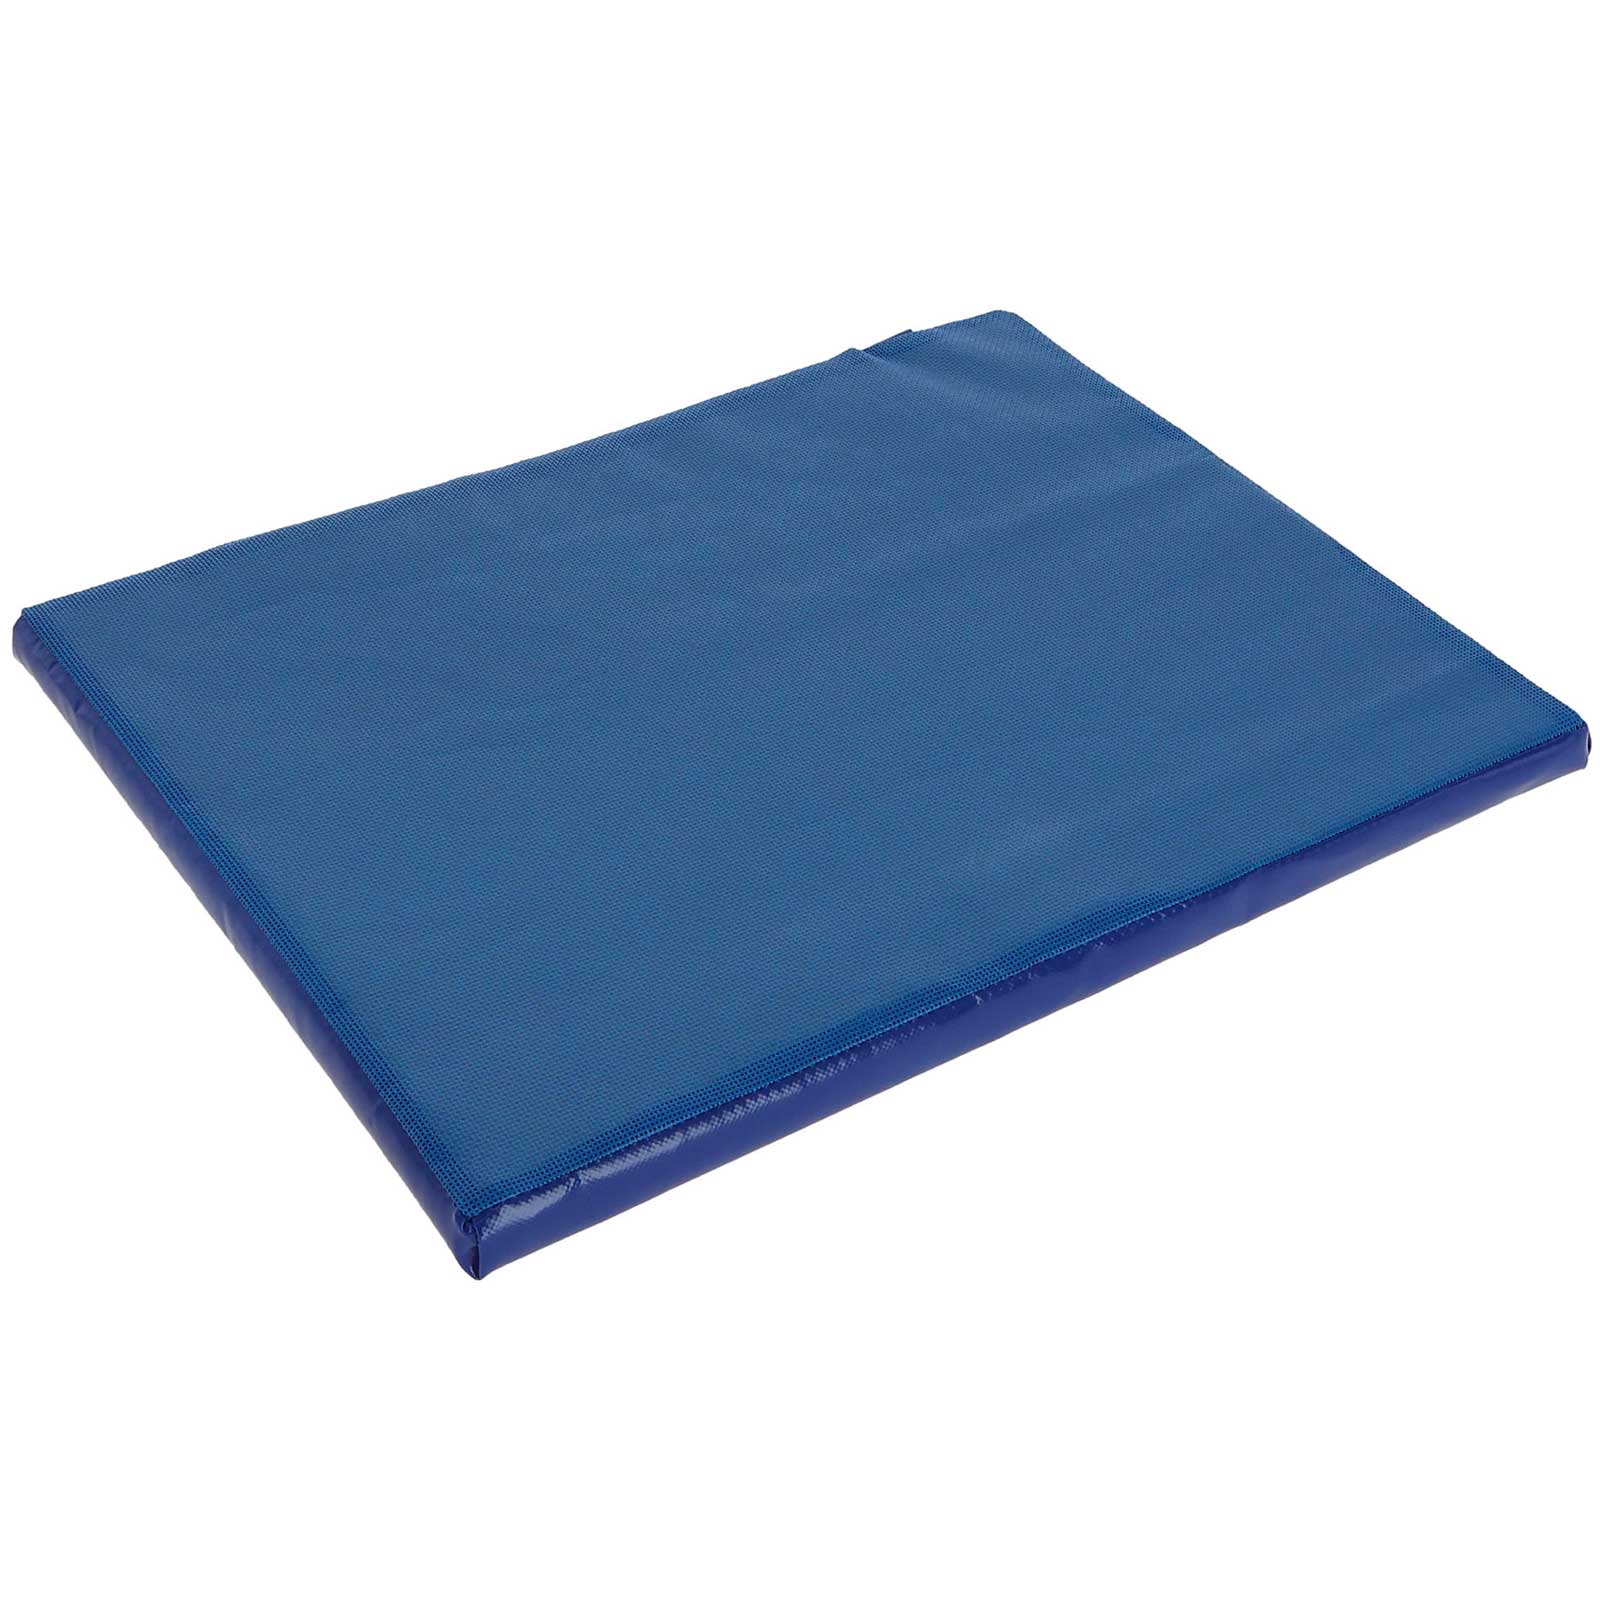 Disinfection mat for shoes 55 x 45 cm